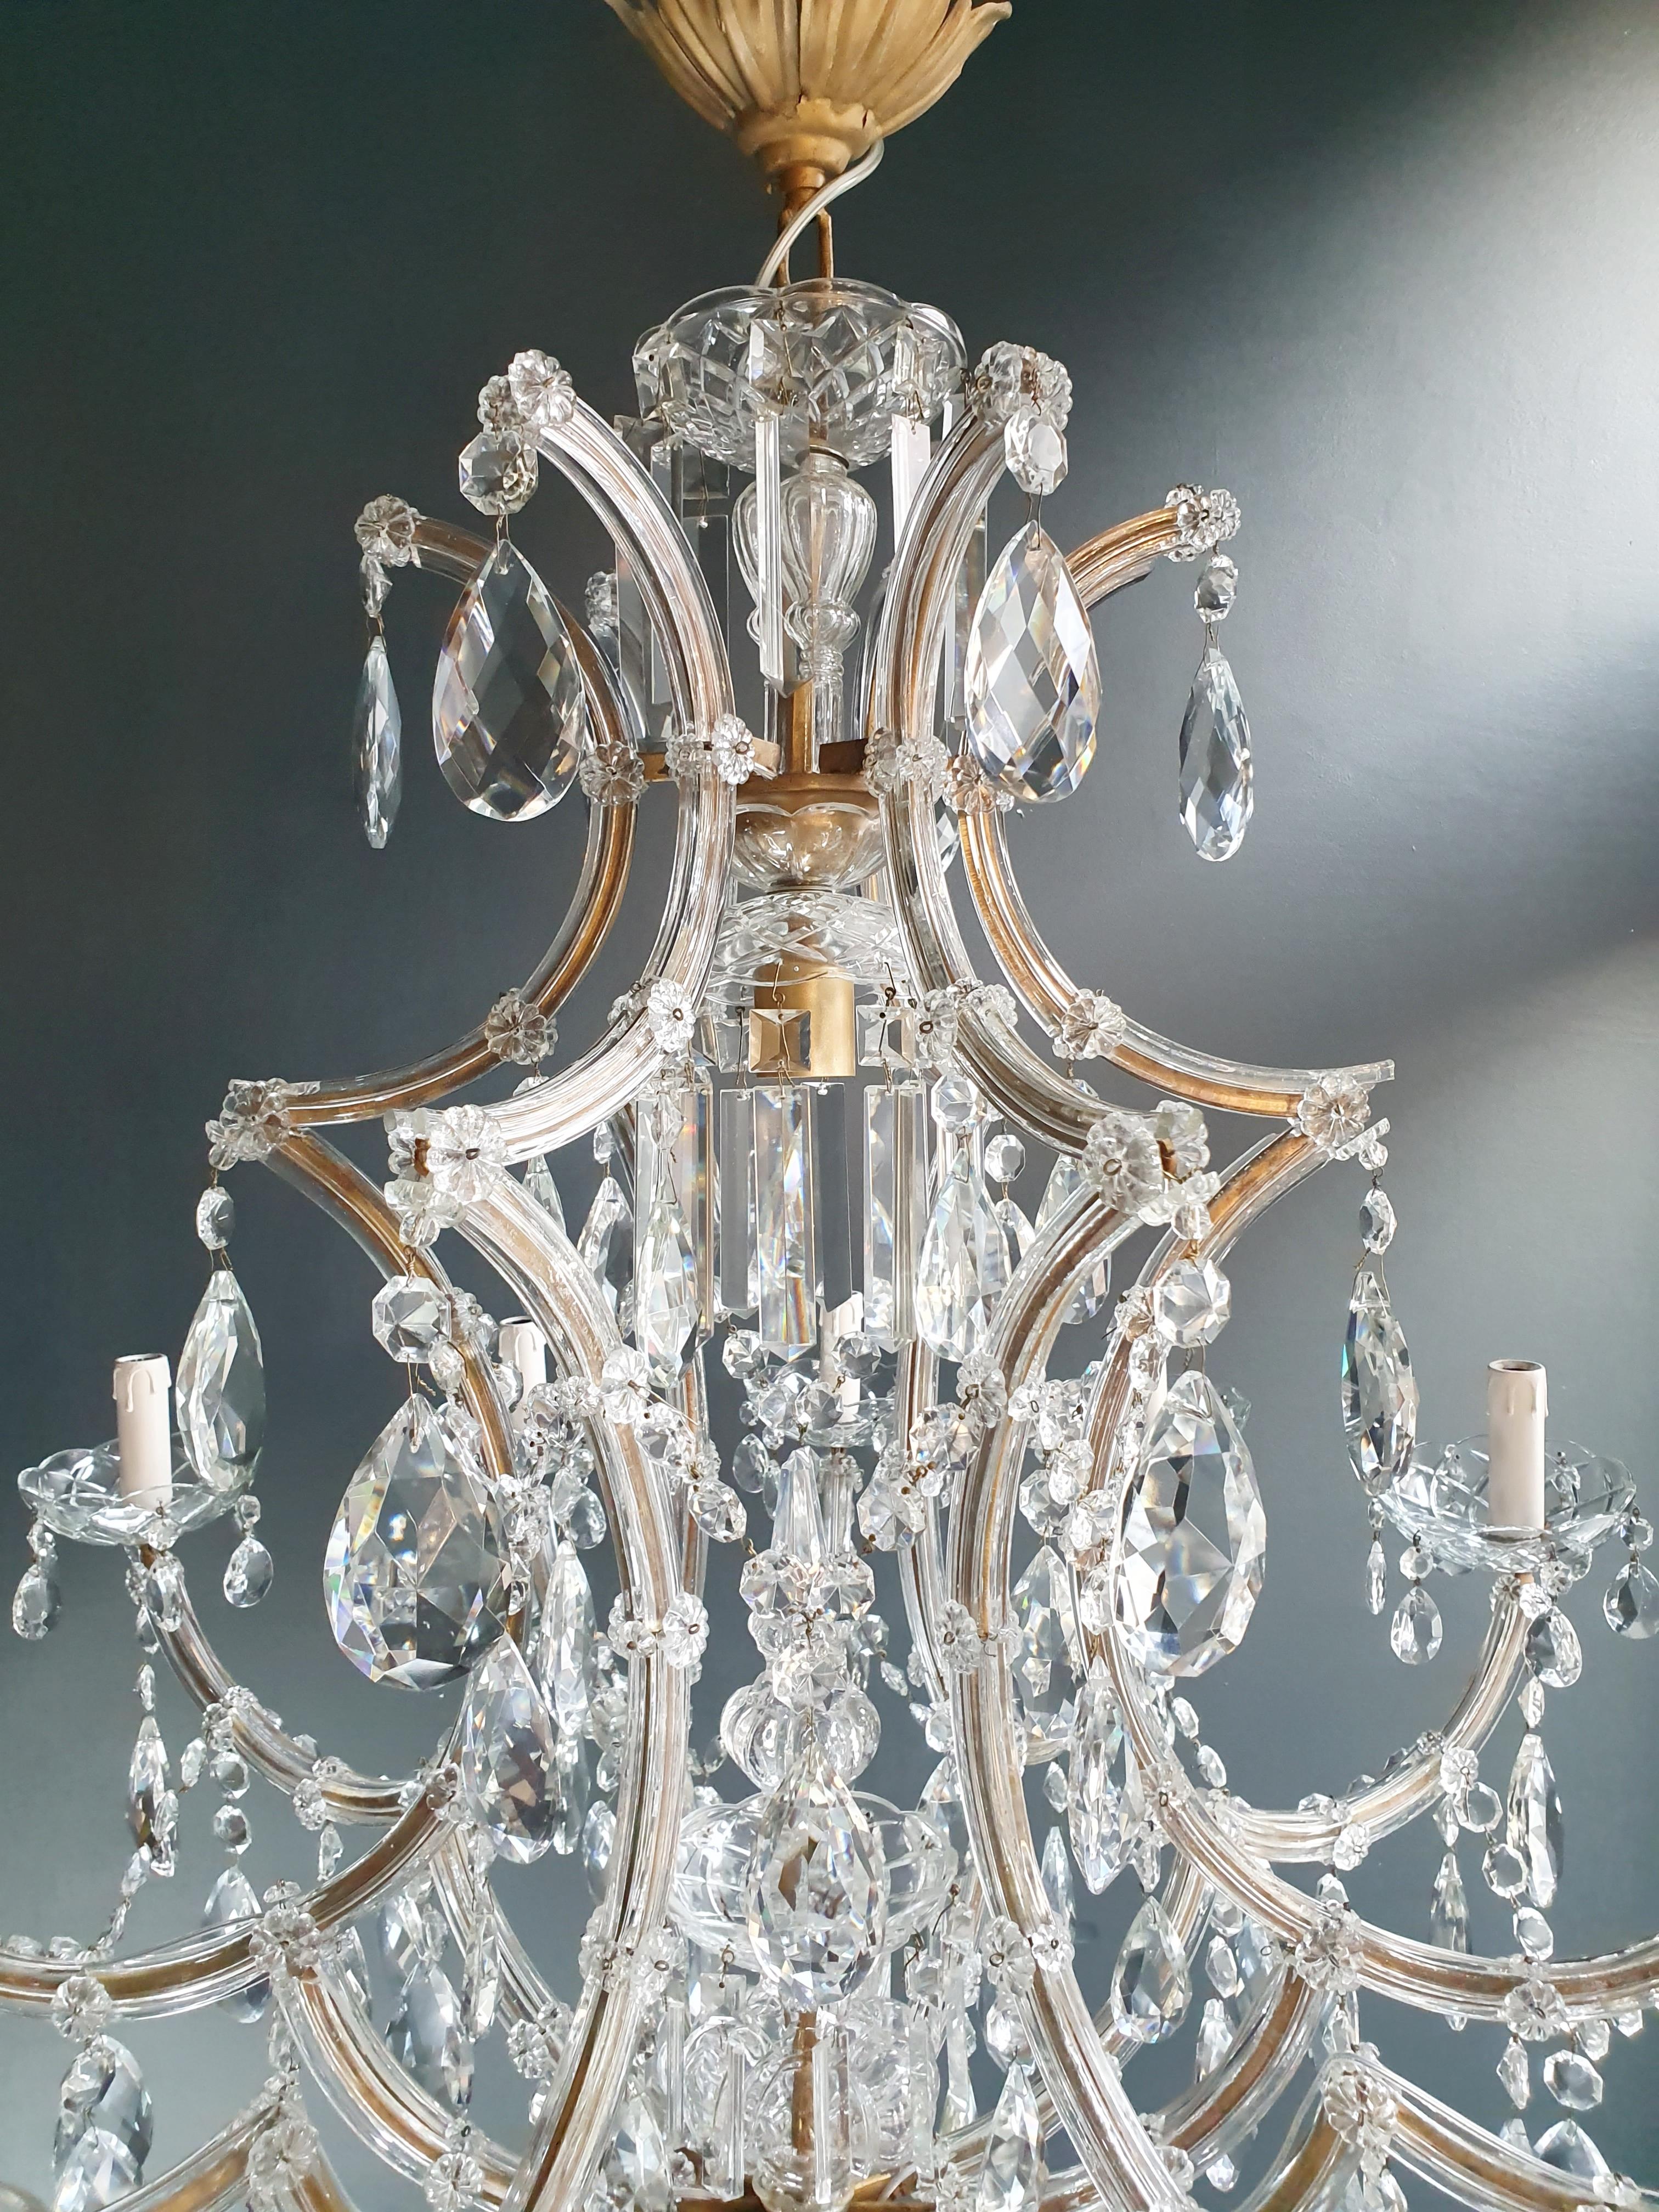 Hand-Knotted Maria Theresa Crystal Chandelier Antique Ceiling Lamp Lustre Art Nouveau